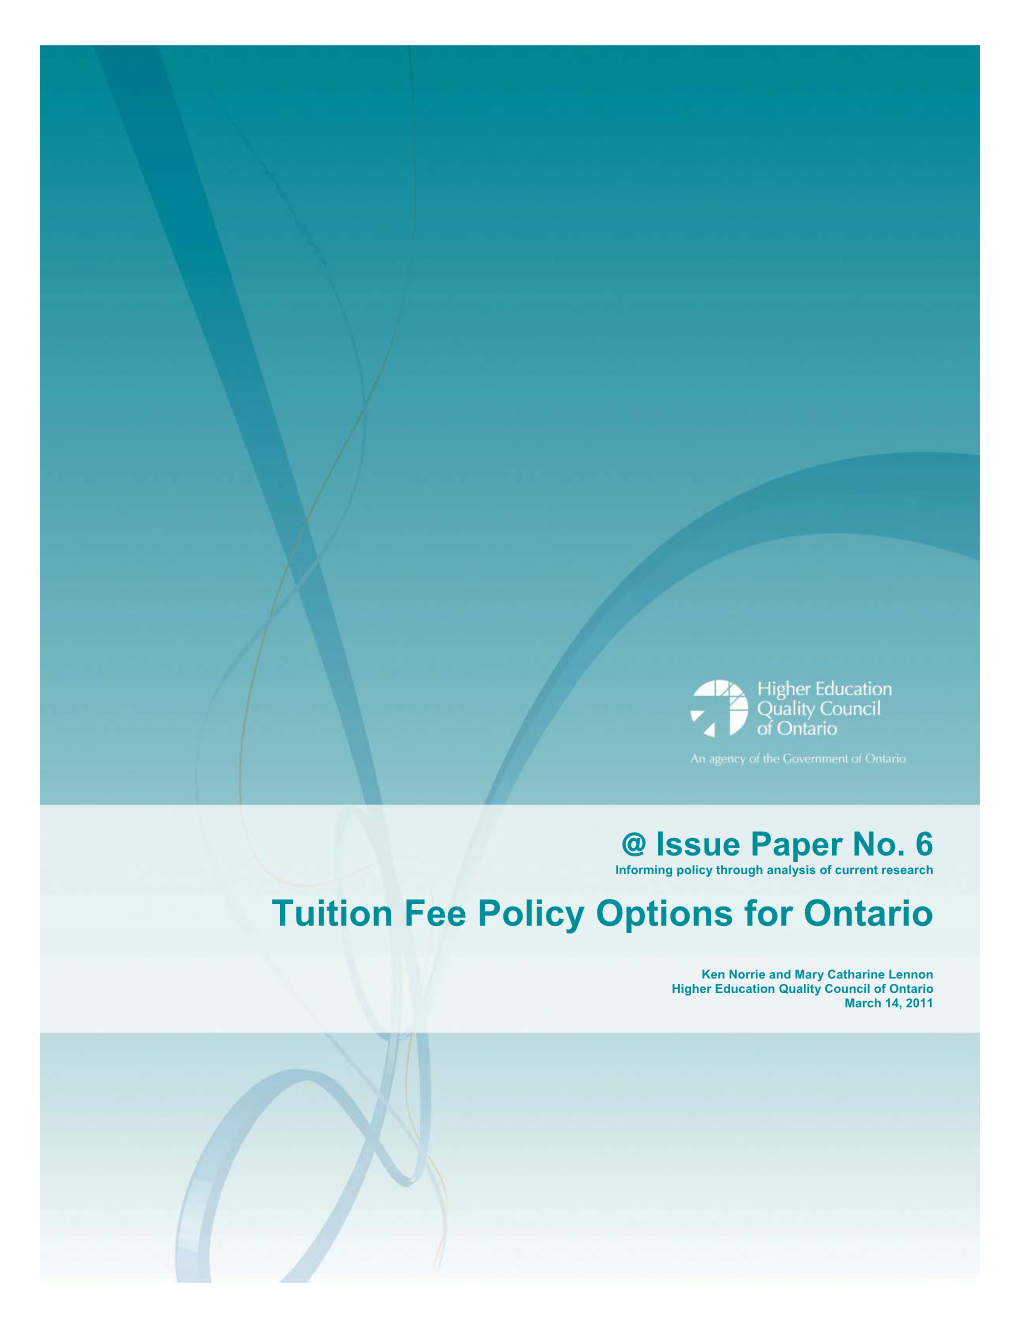 Tuition Fee Policy Options for Ontario